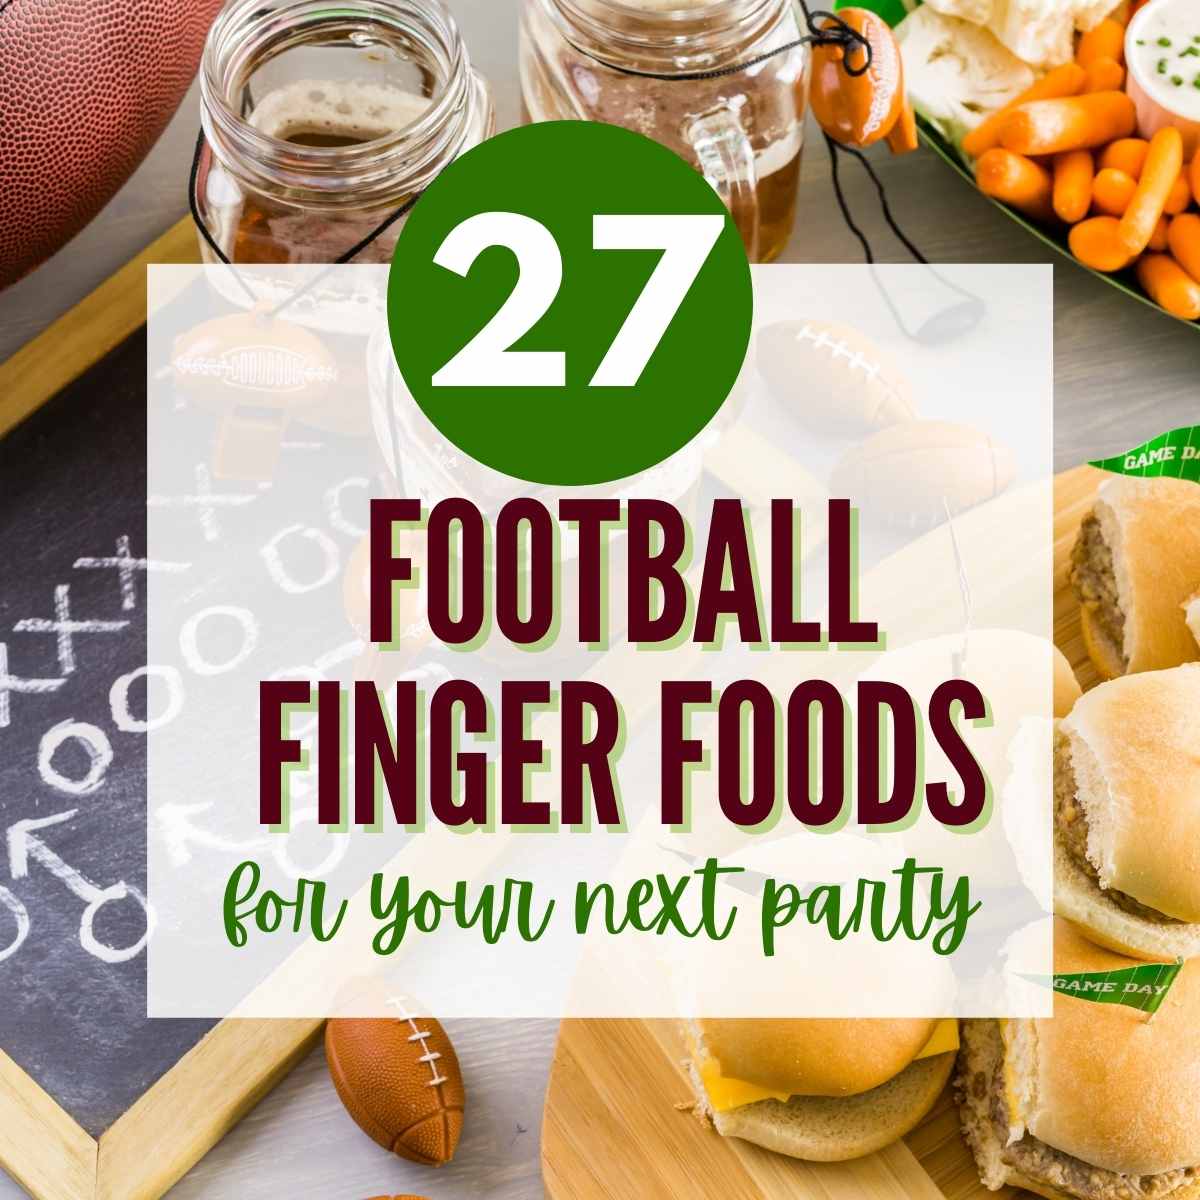 footballs finger foods with text overlay